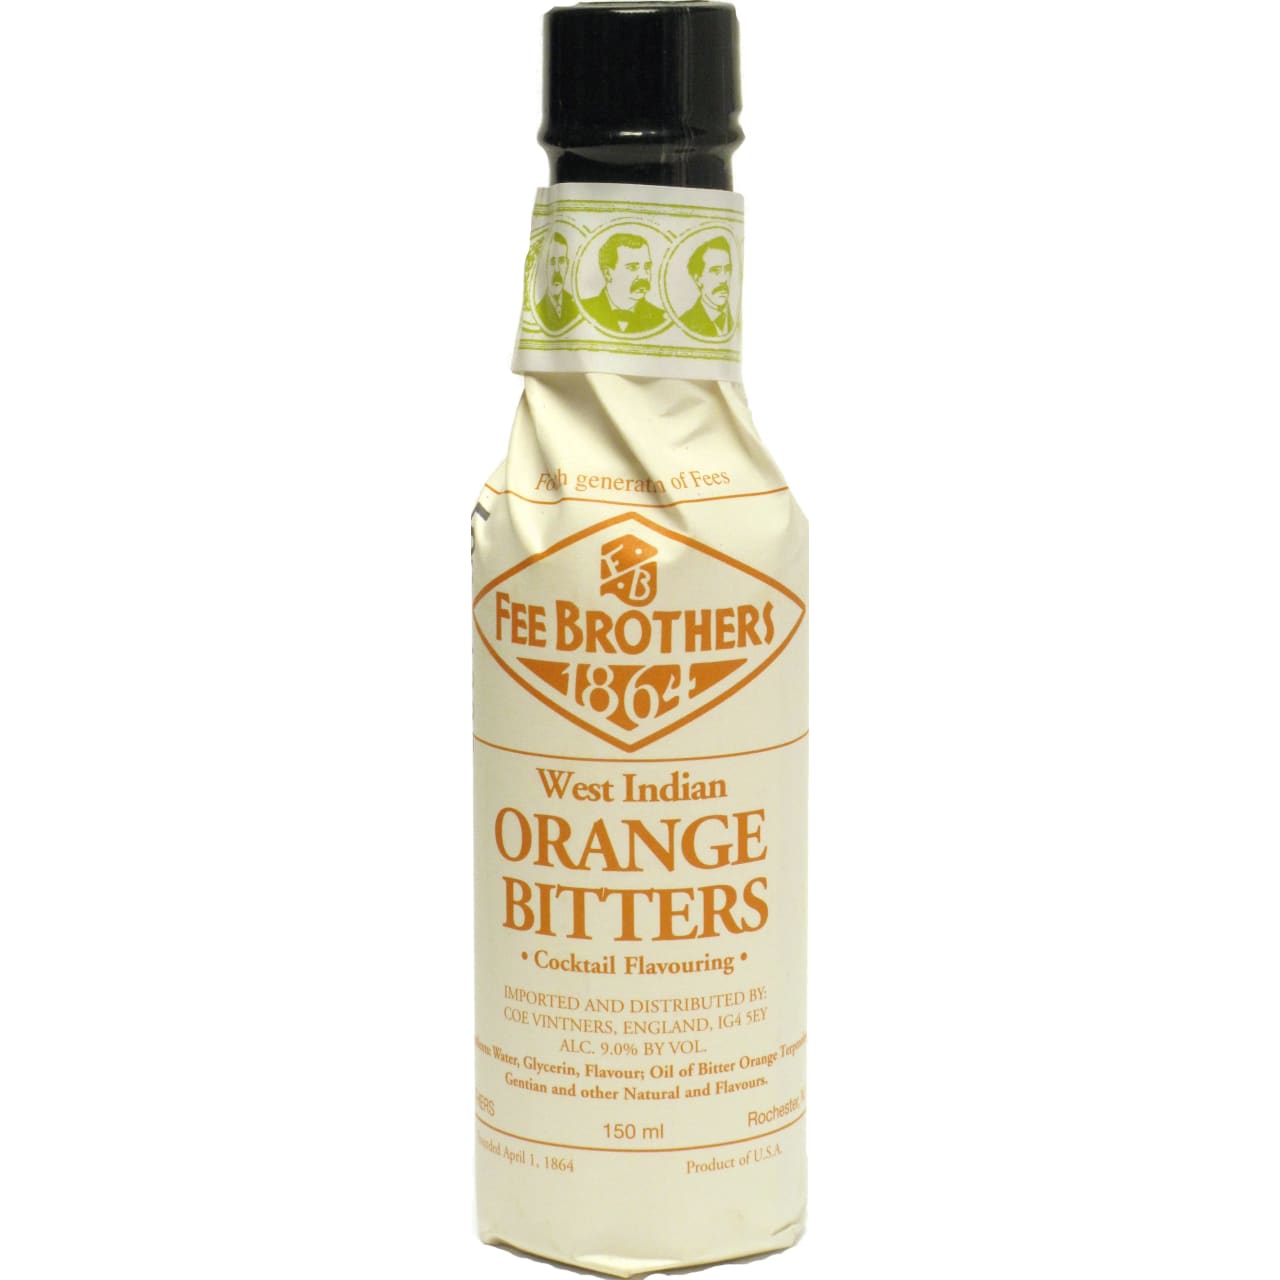 Fee Brothers Orange Bitters is zesty, powerful and uses the finest oranges from the West Indies. The modern trend for authentic classic cocktails means orange bitters have come back into fashion and Fees Brothers execution of their bitters make it a product you’ll be desperate to try.